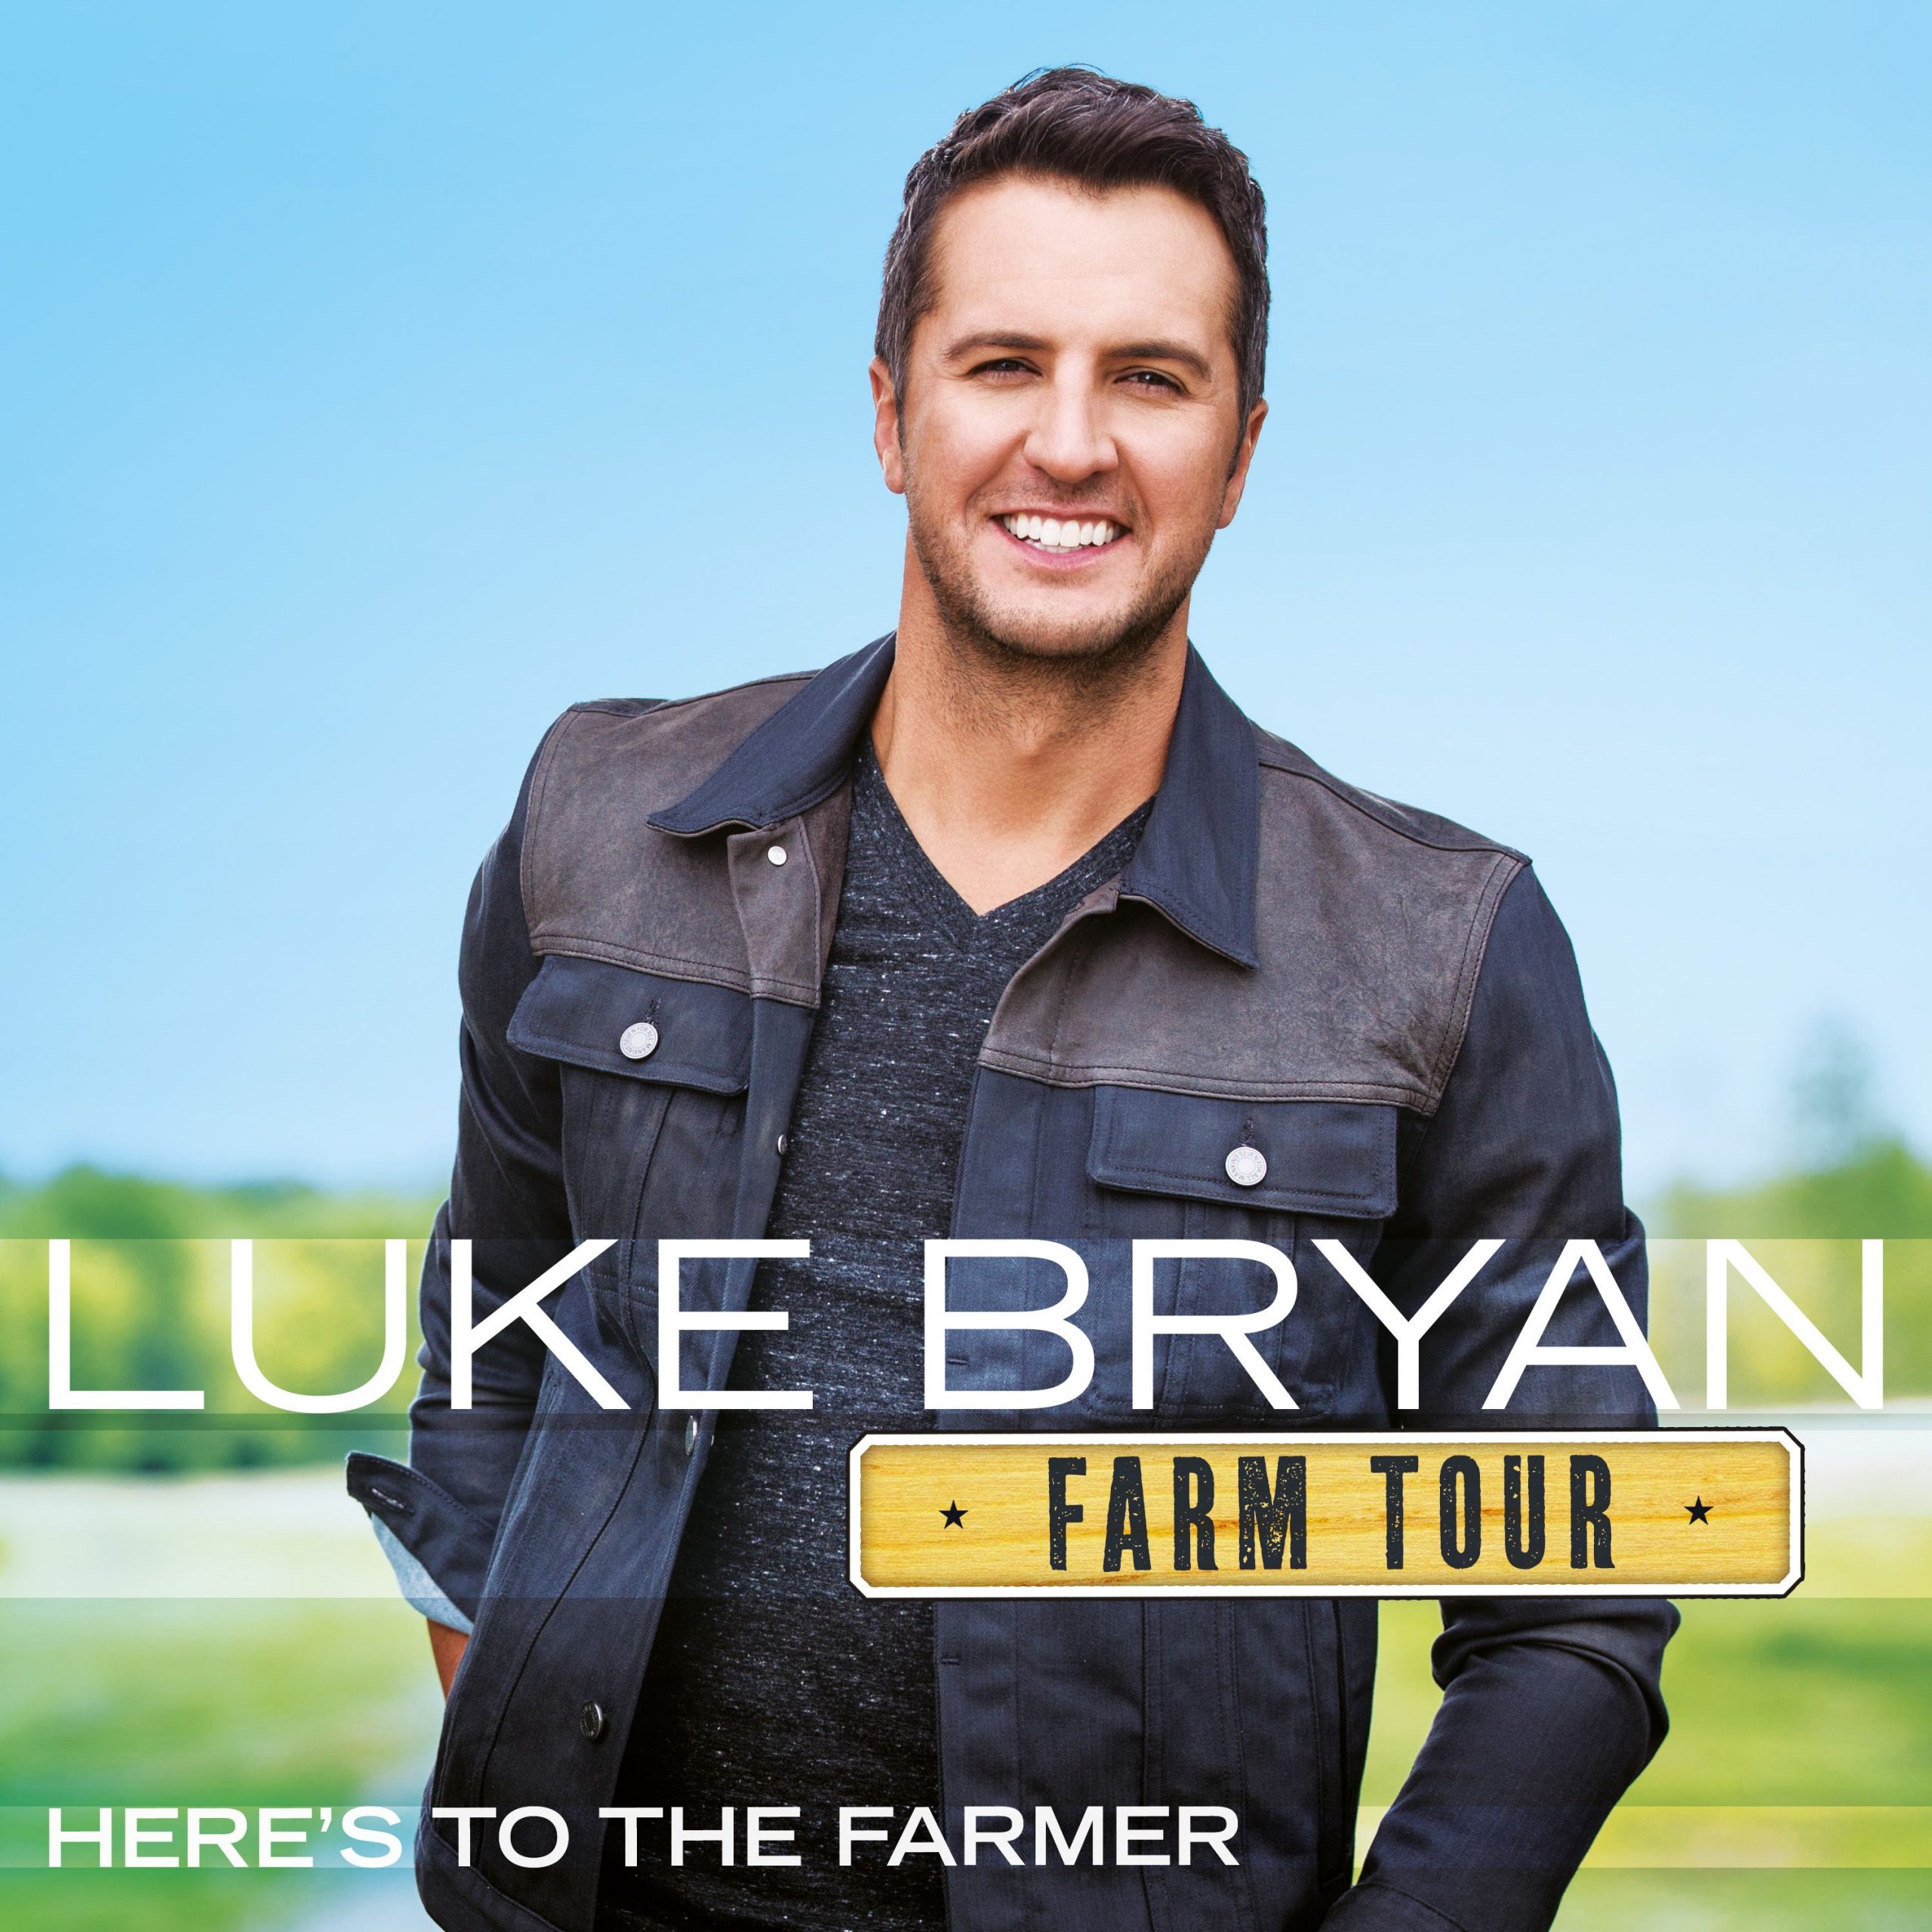 Luke Bryan’s First-Ever Farm Tour EP,  Farm Tour…Here’s To The Farmer, To Be Released September 23  In Advance of His Eighth Annual Farm Tour